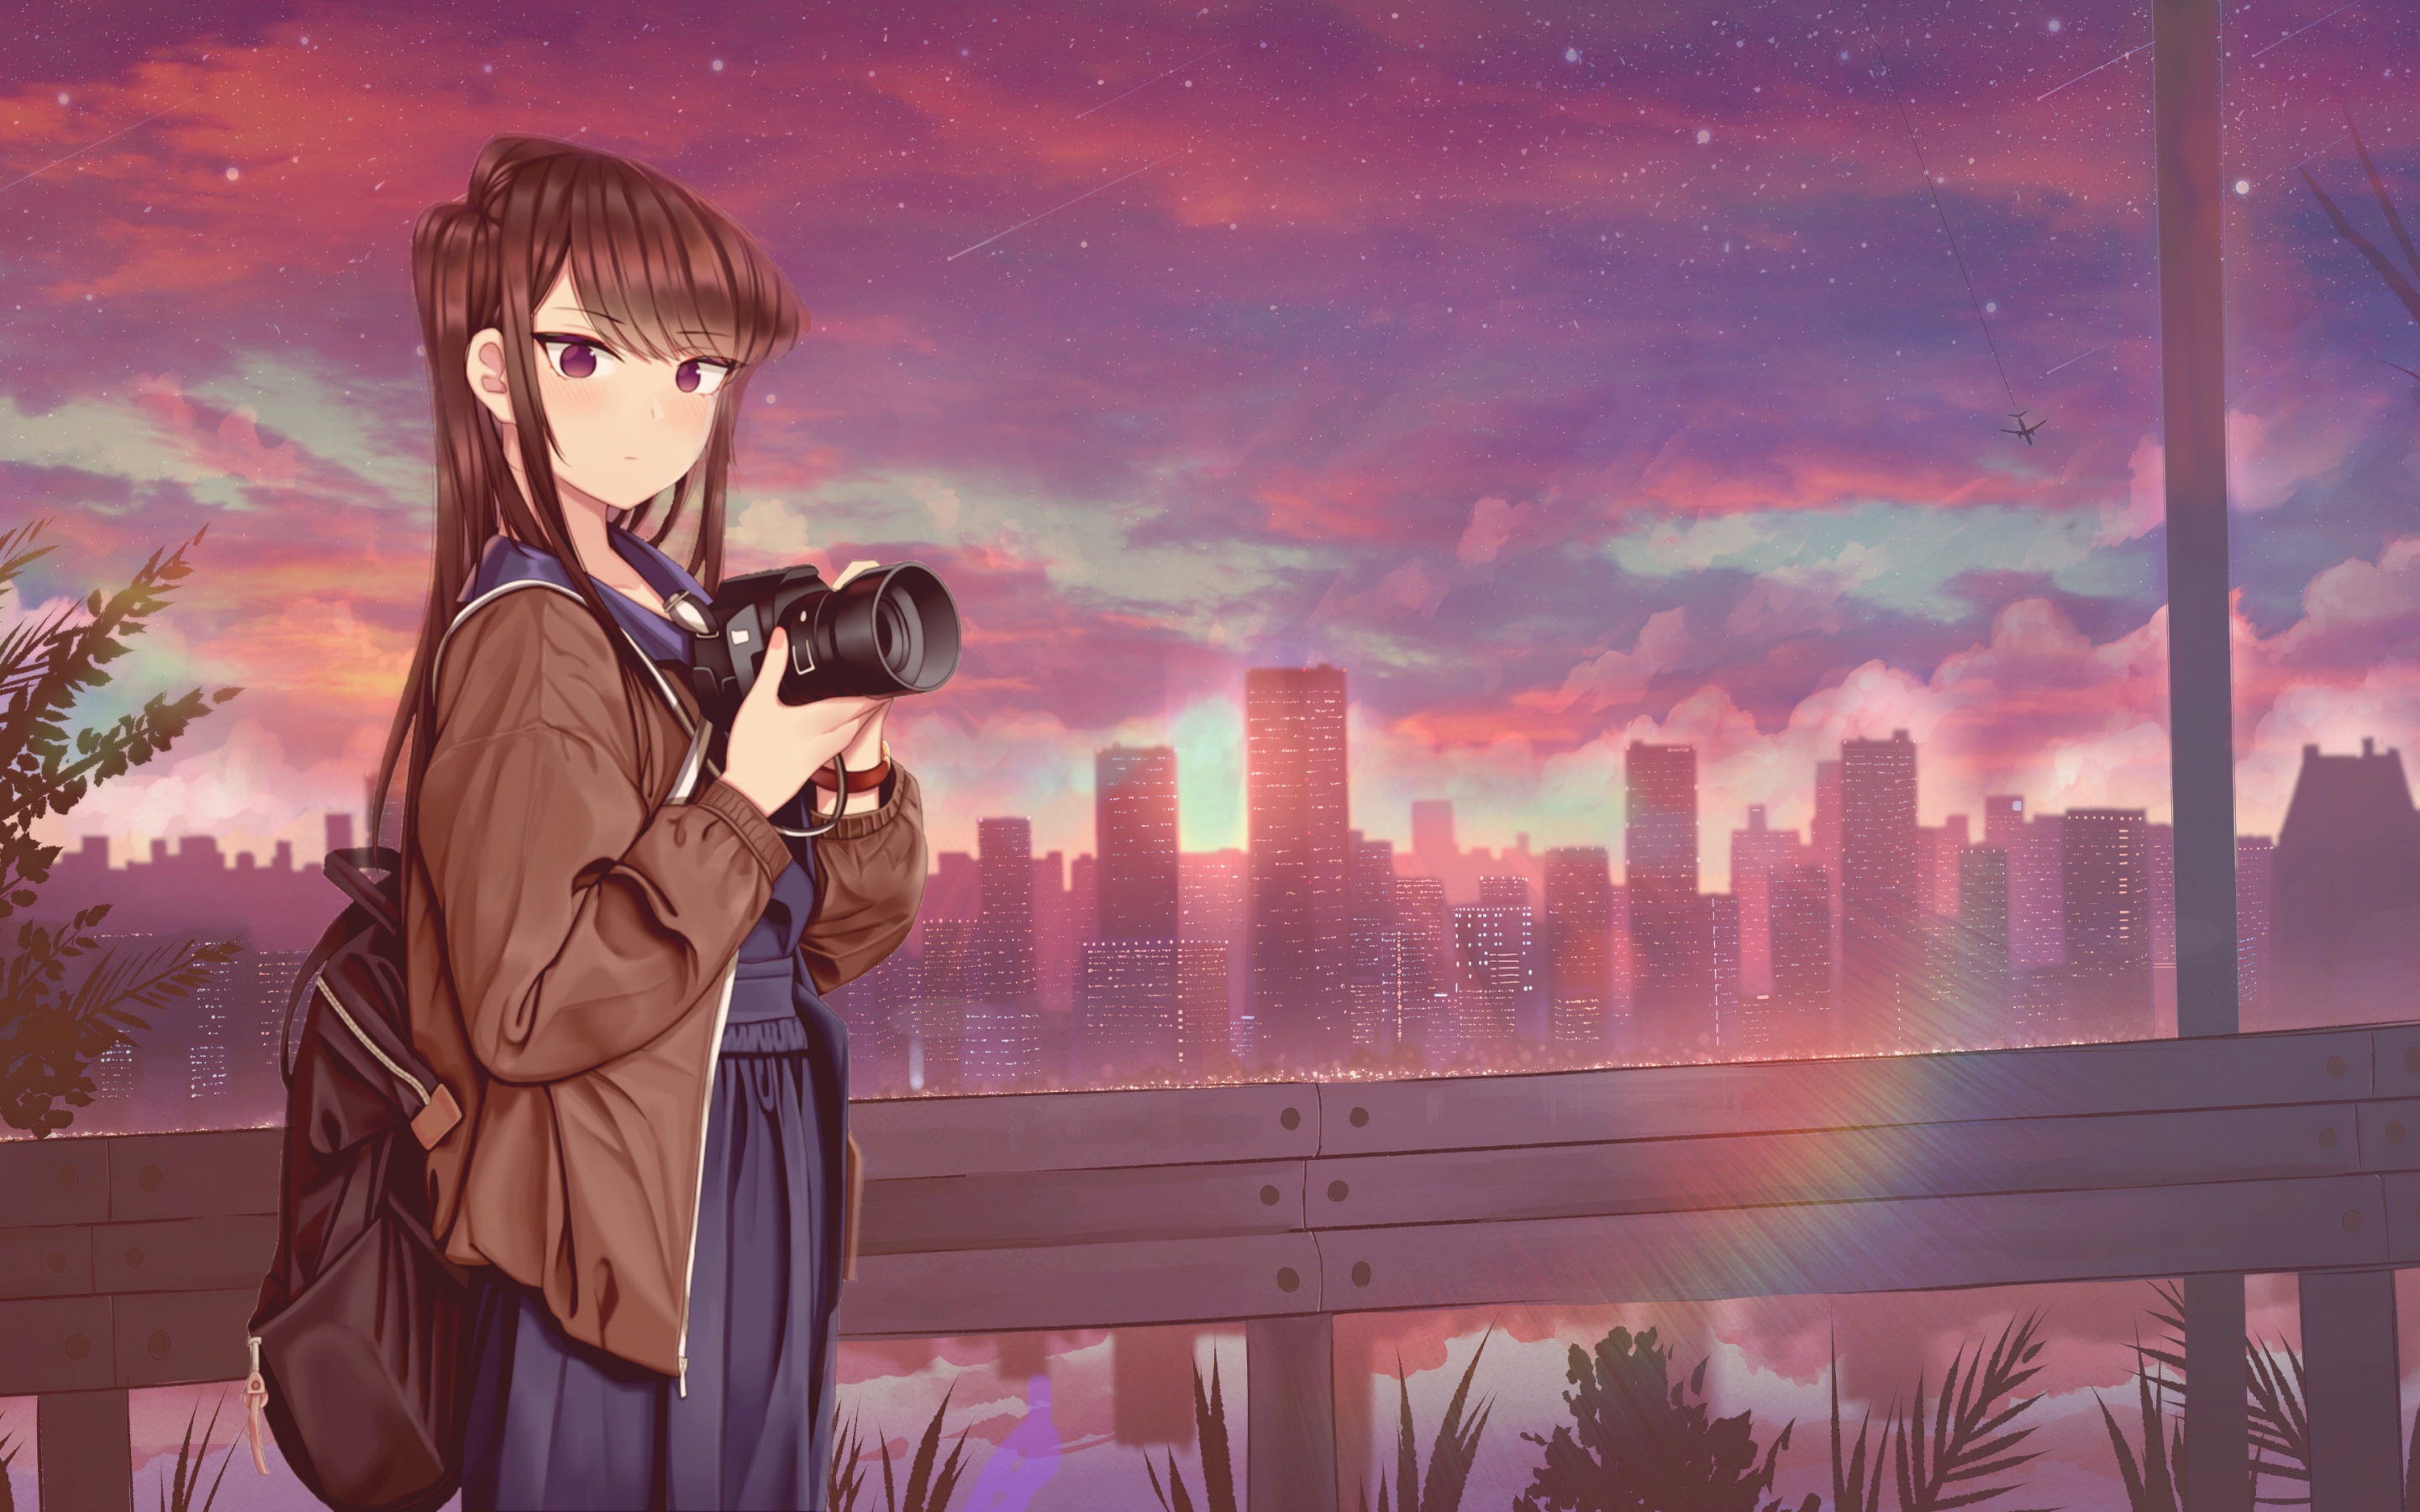 Anime Sunset 4k Ultra HD Wallpaper by Abyss